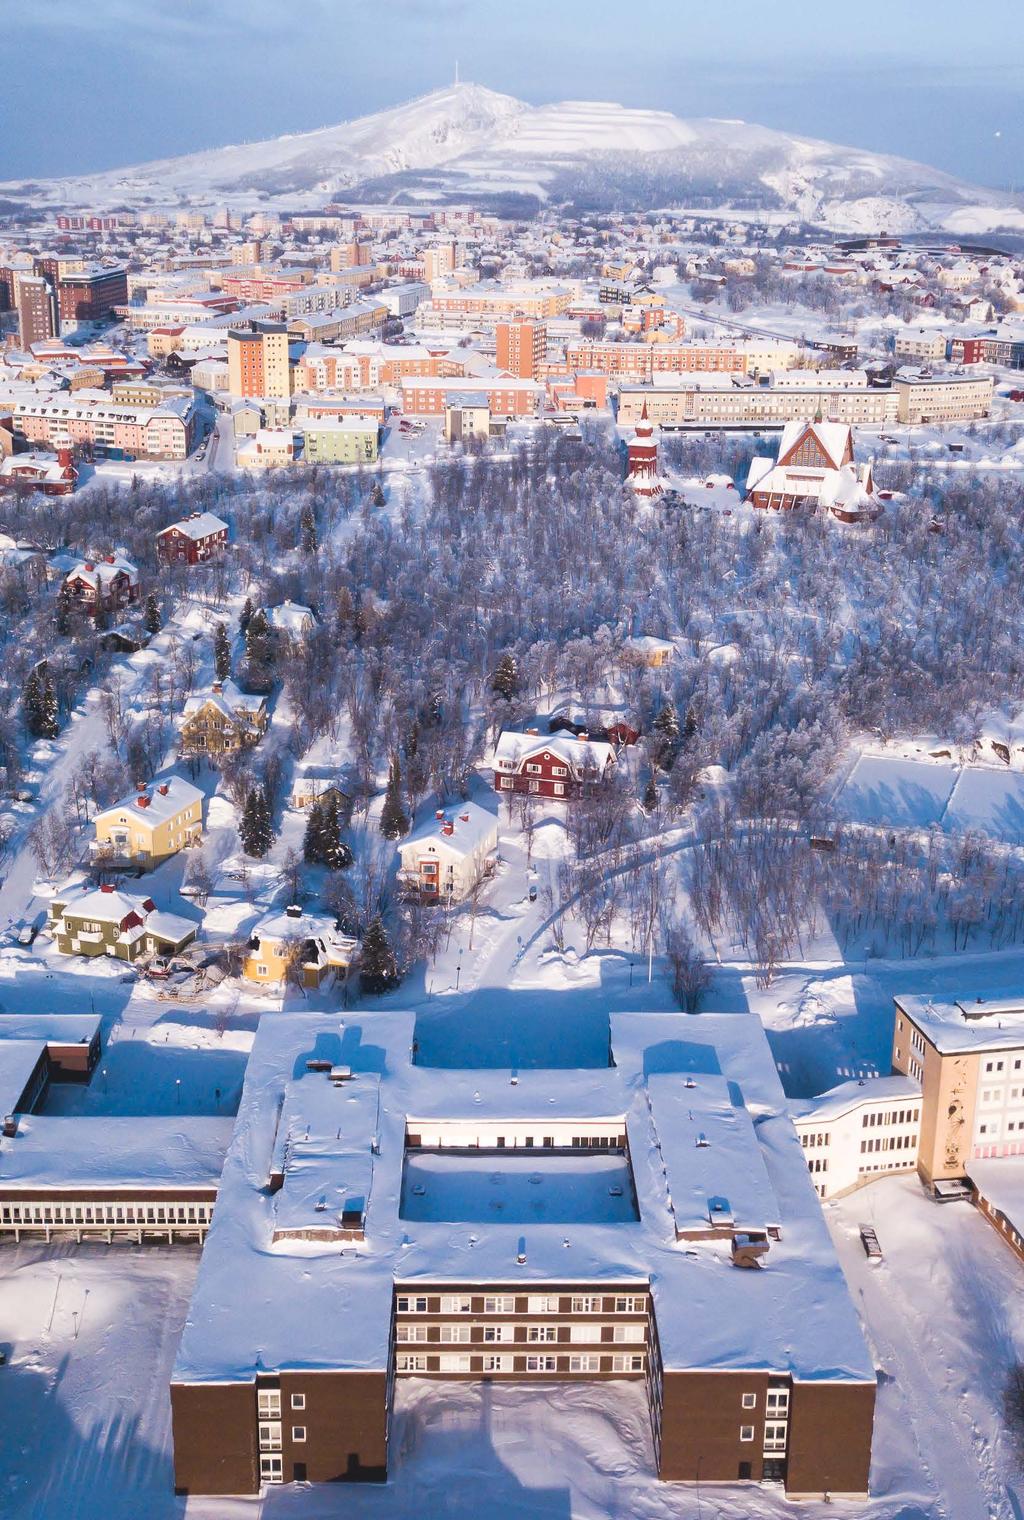 Sweden and the Kiruna region Sweden is one of the most competitive and productive economies in the world, leading within innovation and with refined consumers and an open mindset to international